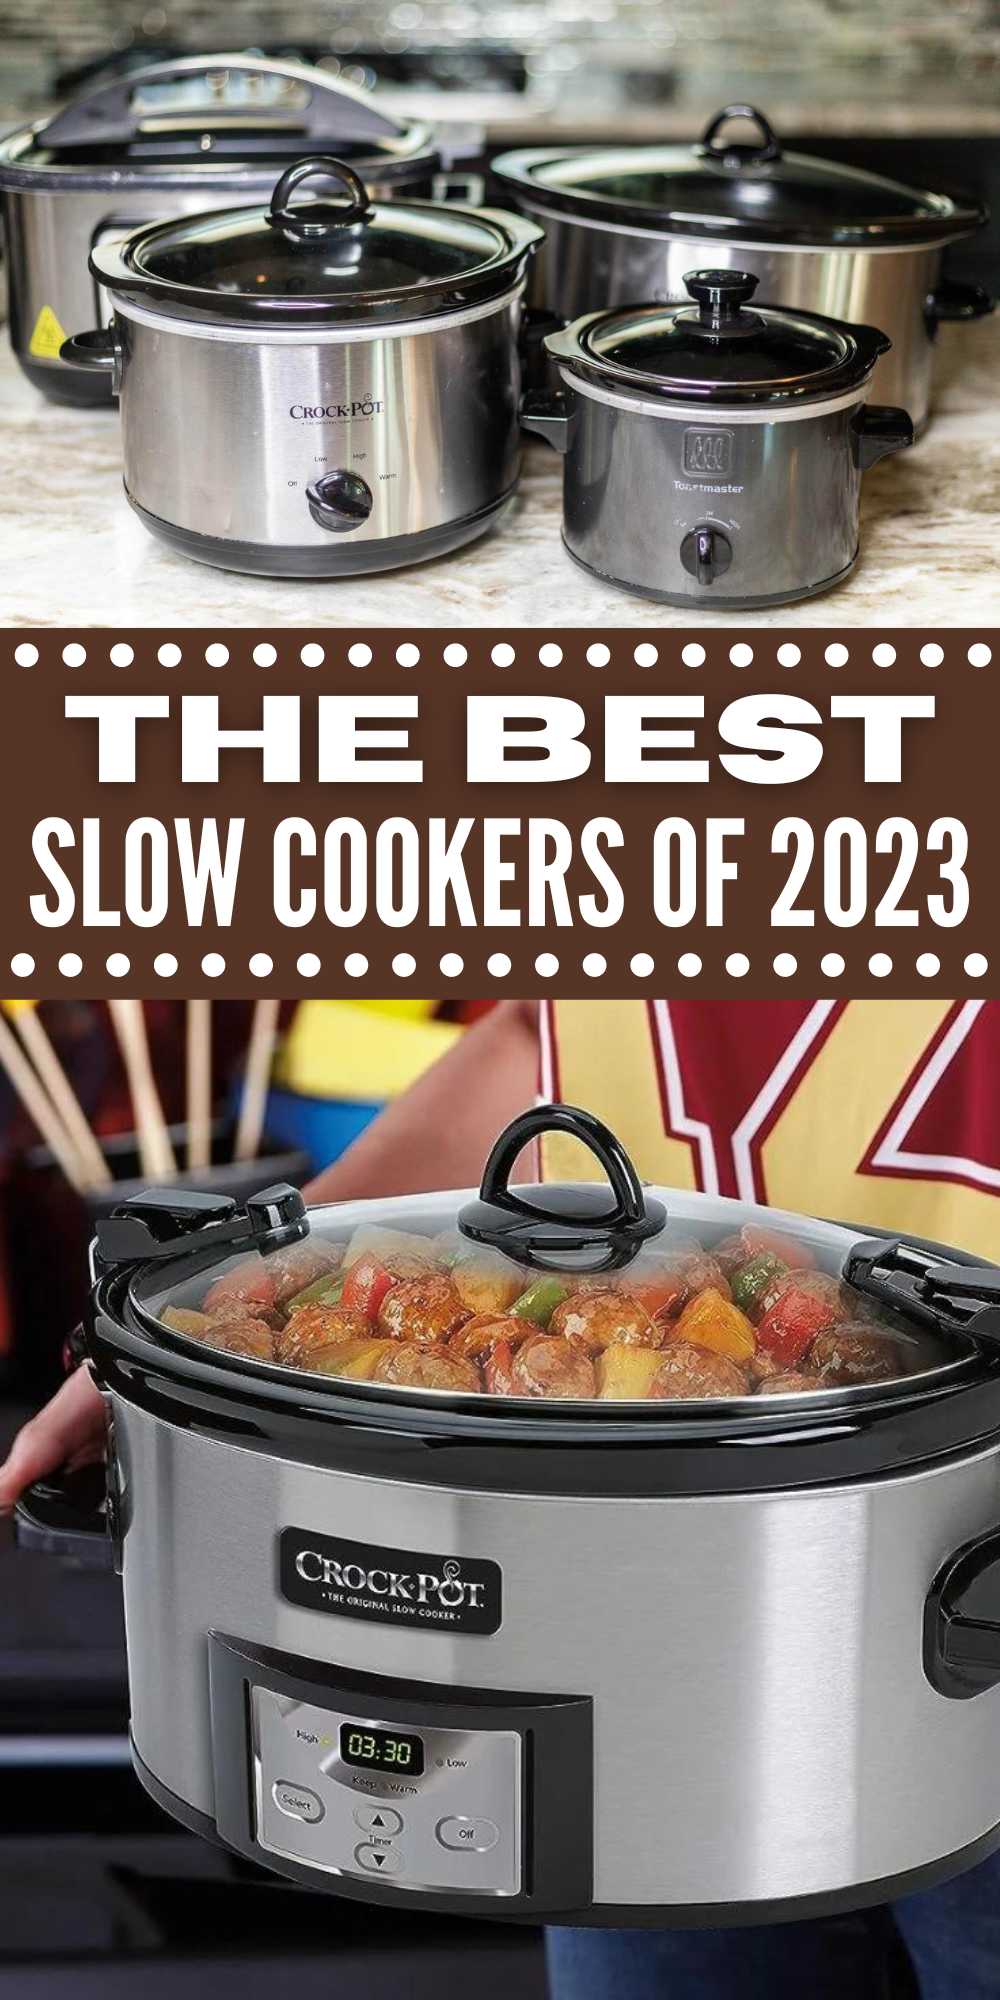 If I made a list of my must-have kitchen appliances, a slow cooker would be right at the top! The best slow cookers make it easy to start a recipe in the morning, then forget about it until dinner time. We have gathered all the information to pick the best slow cooker for your family. #eatingonadime #bestslowcookers #bestslowcookersfor2023